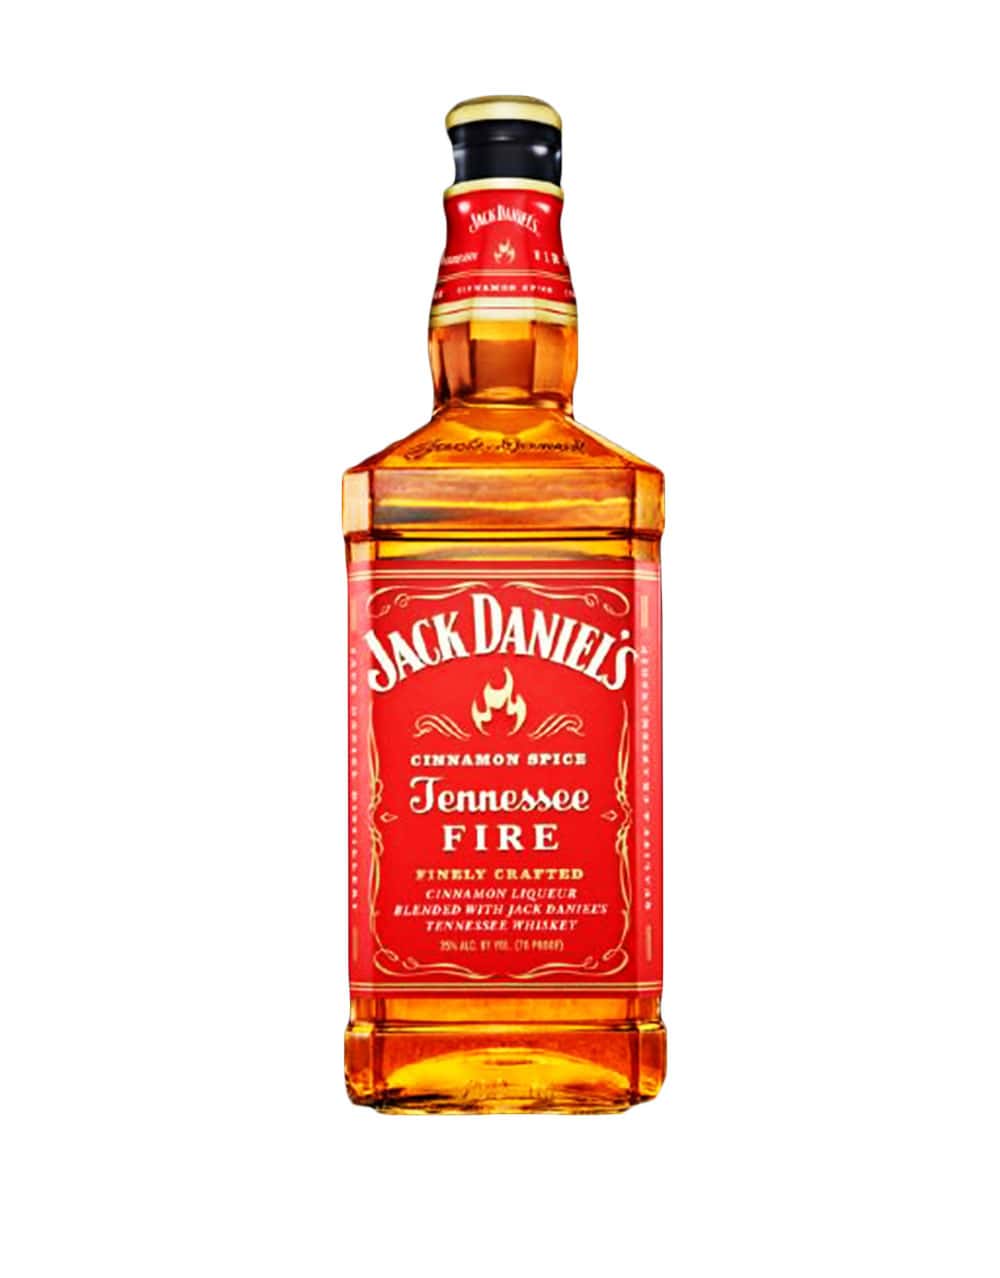 Jack Daniel's Tennessee Fire whiskey